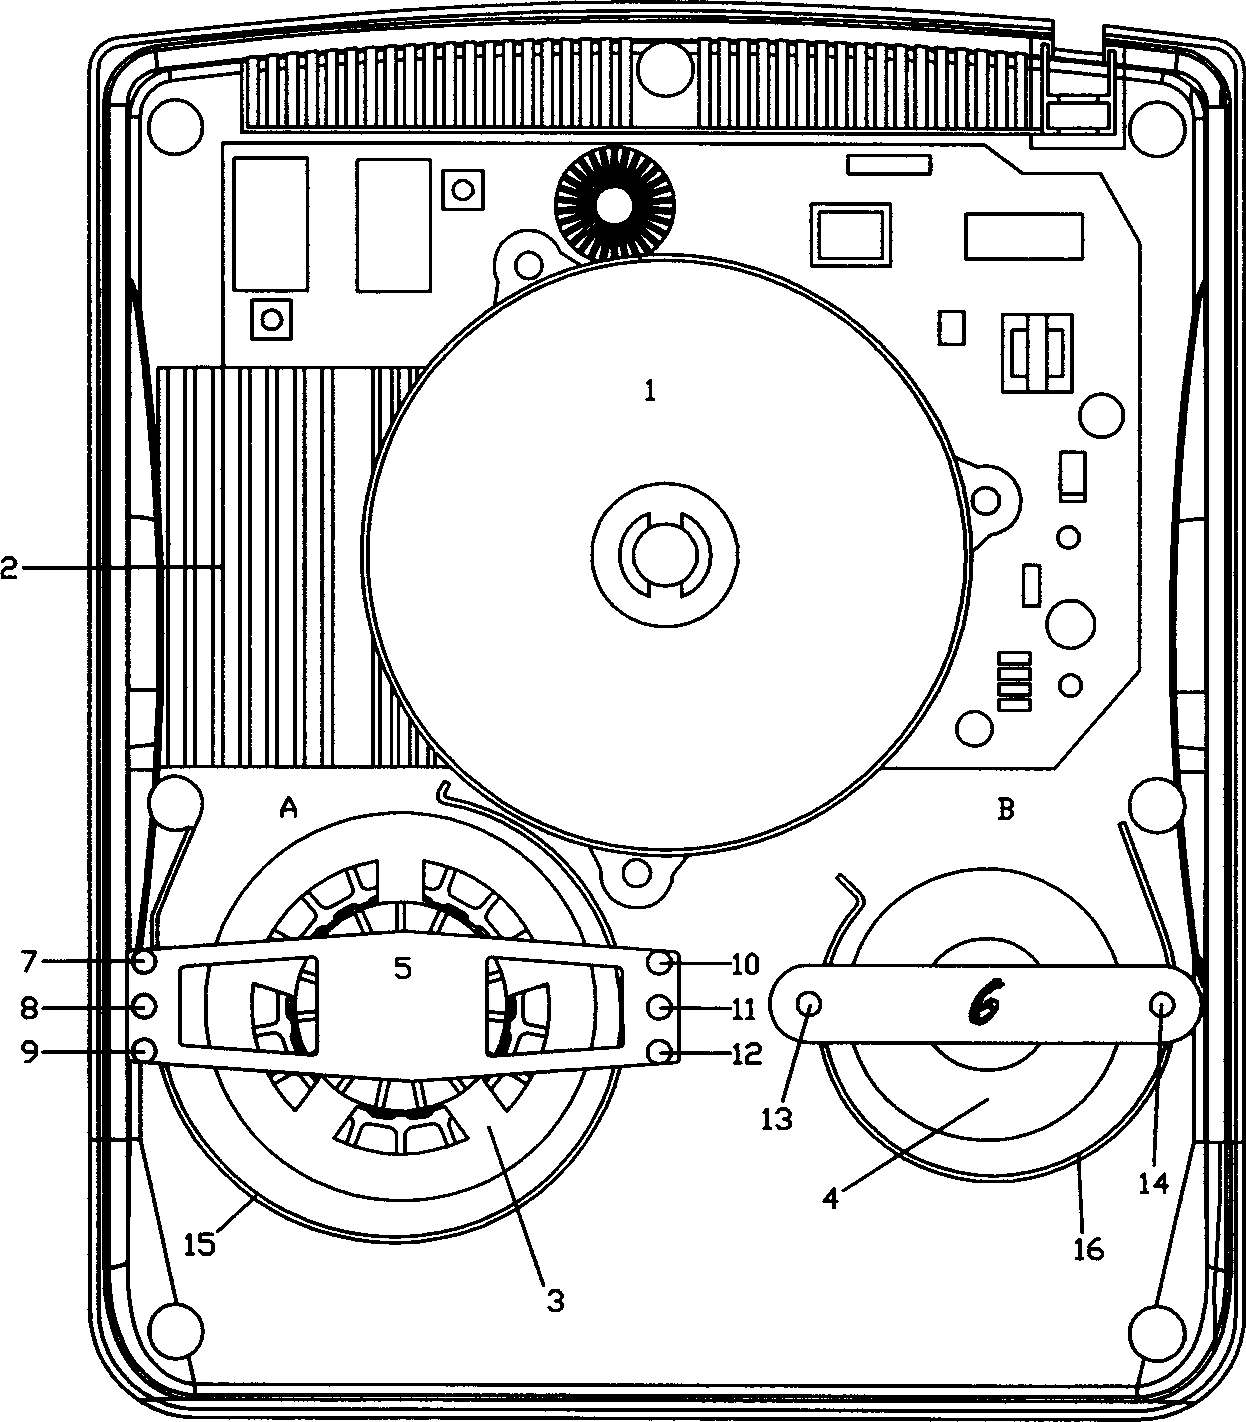 Electromagnetic oven with turbo fan